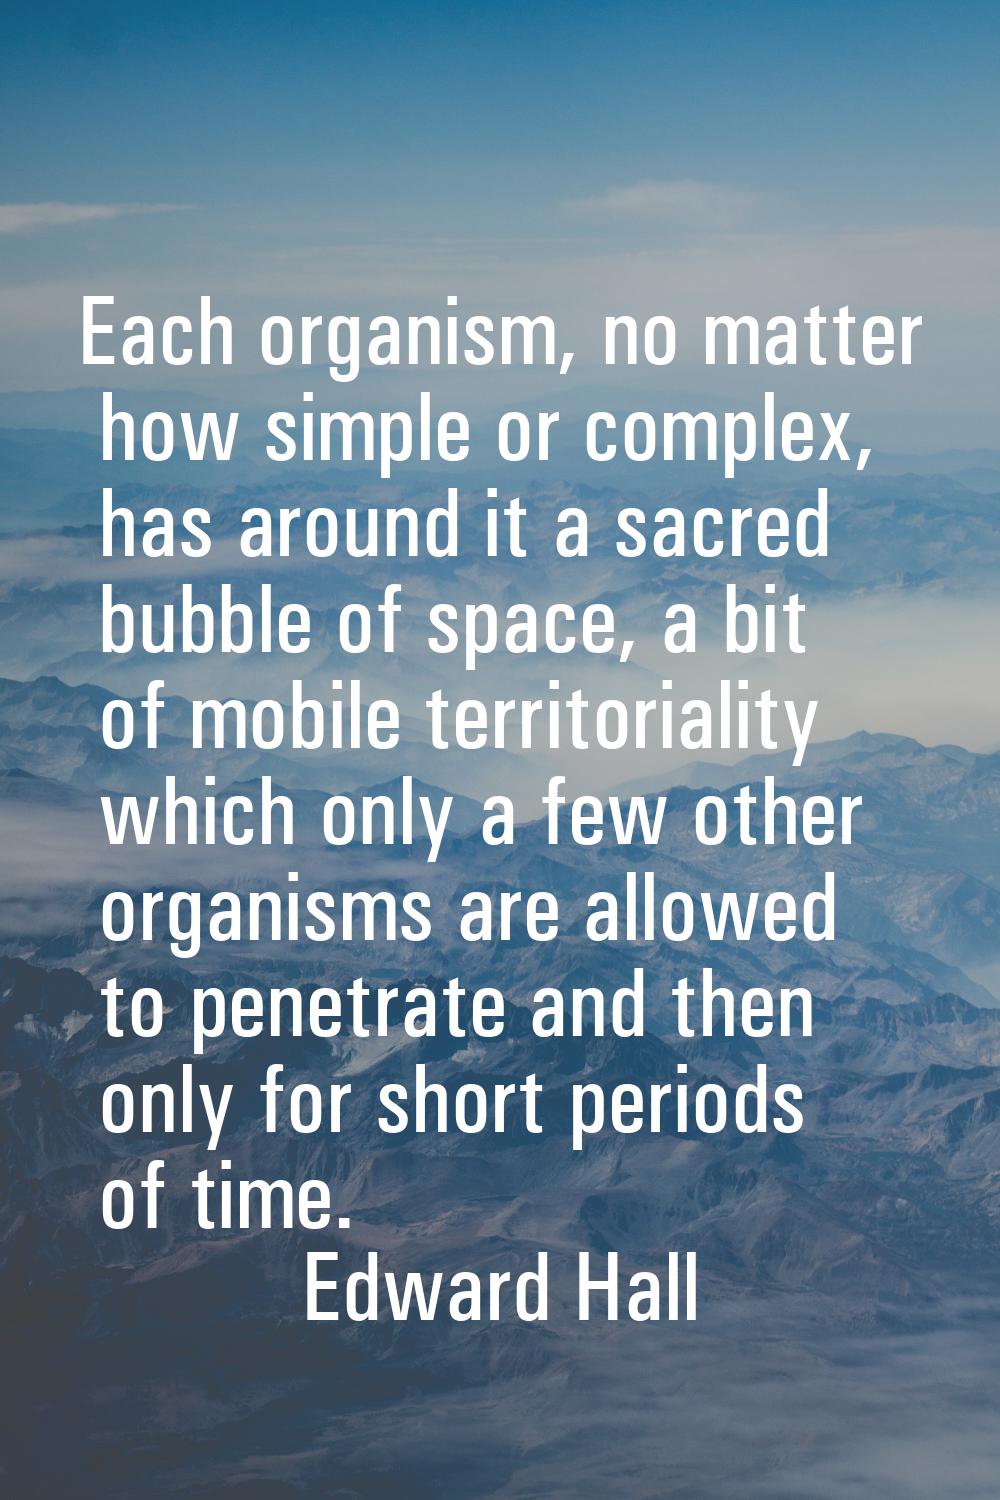 Each organism, no matter how simple or complex, has around it a sacred bubble of space, a bit of mo